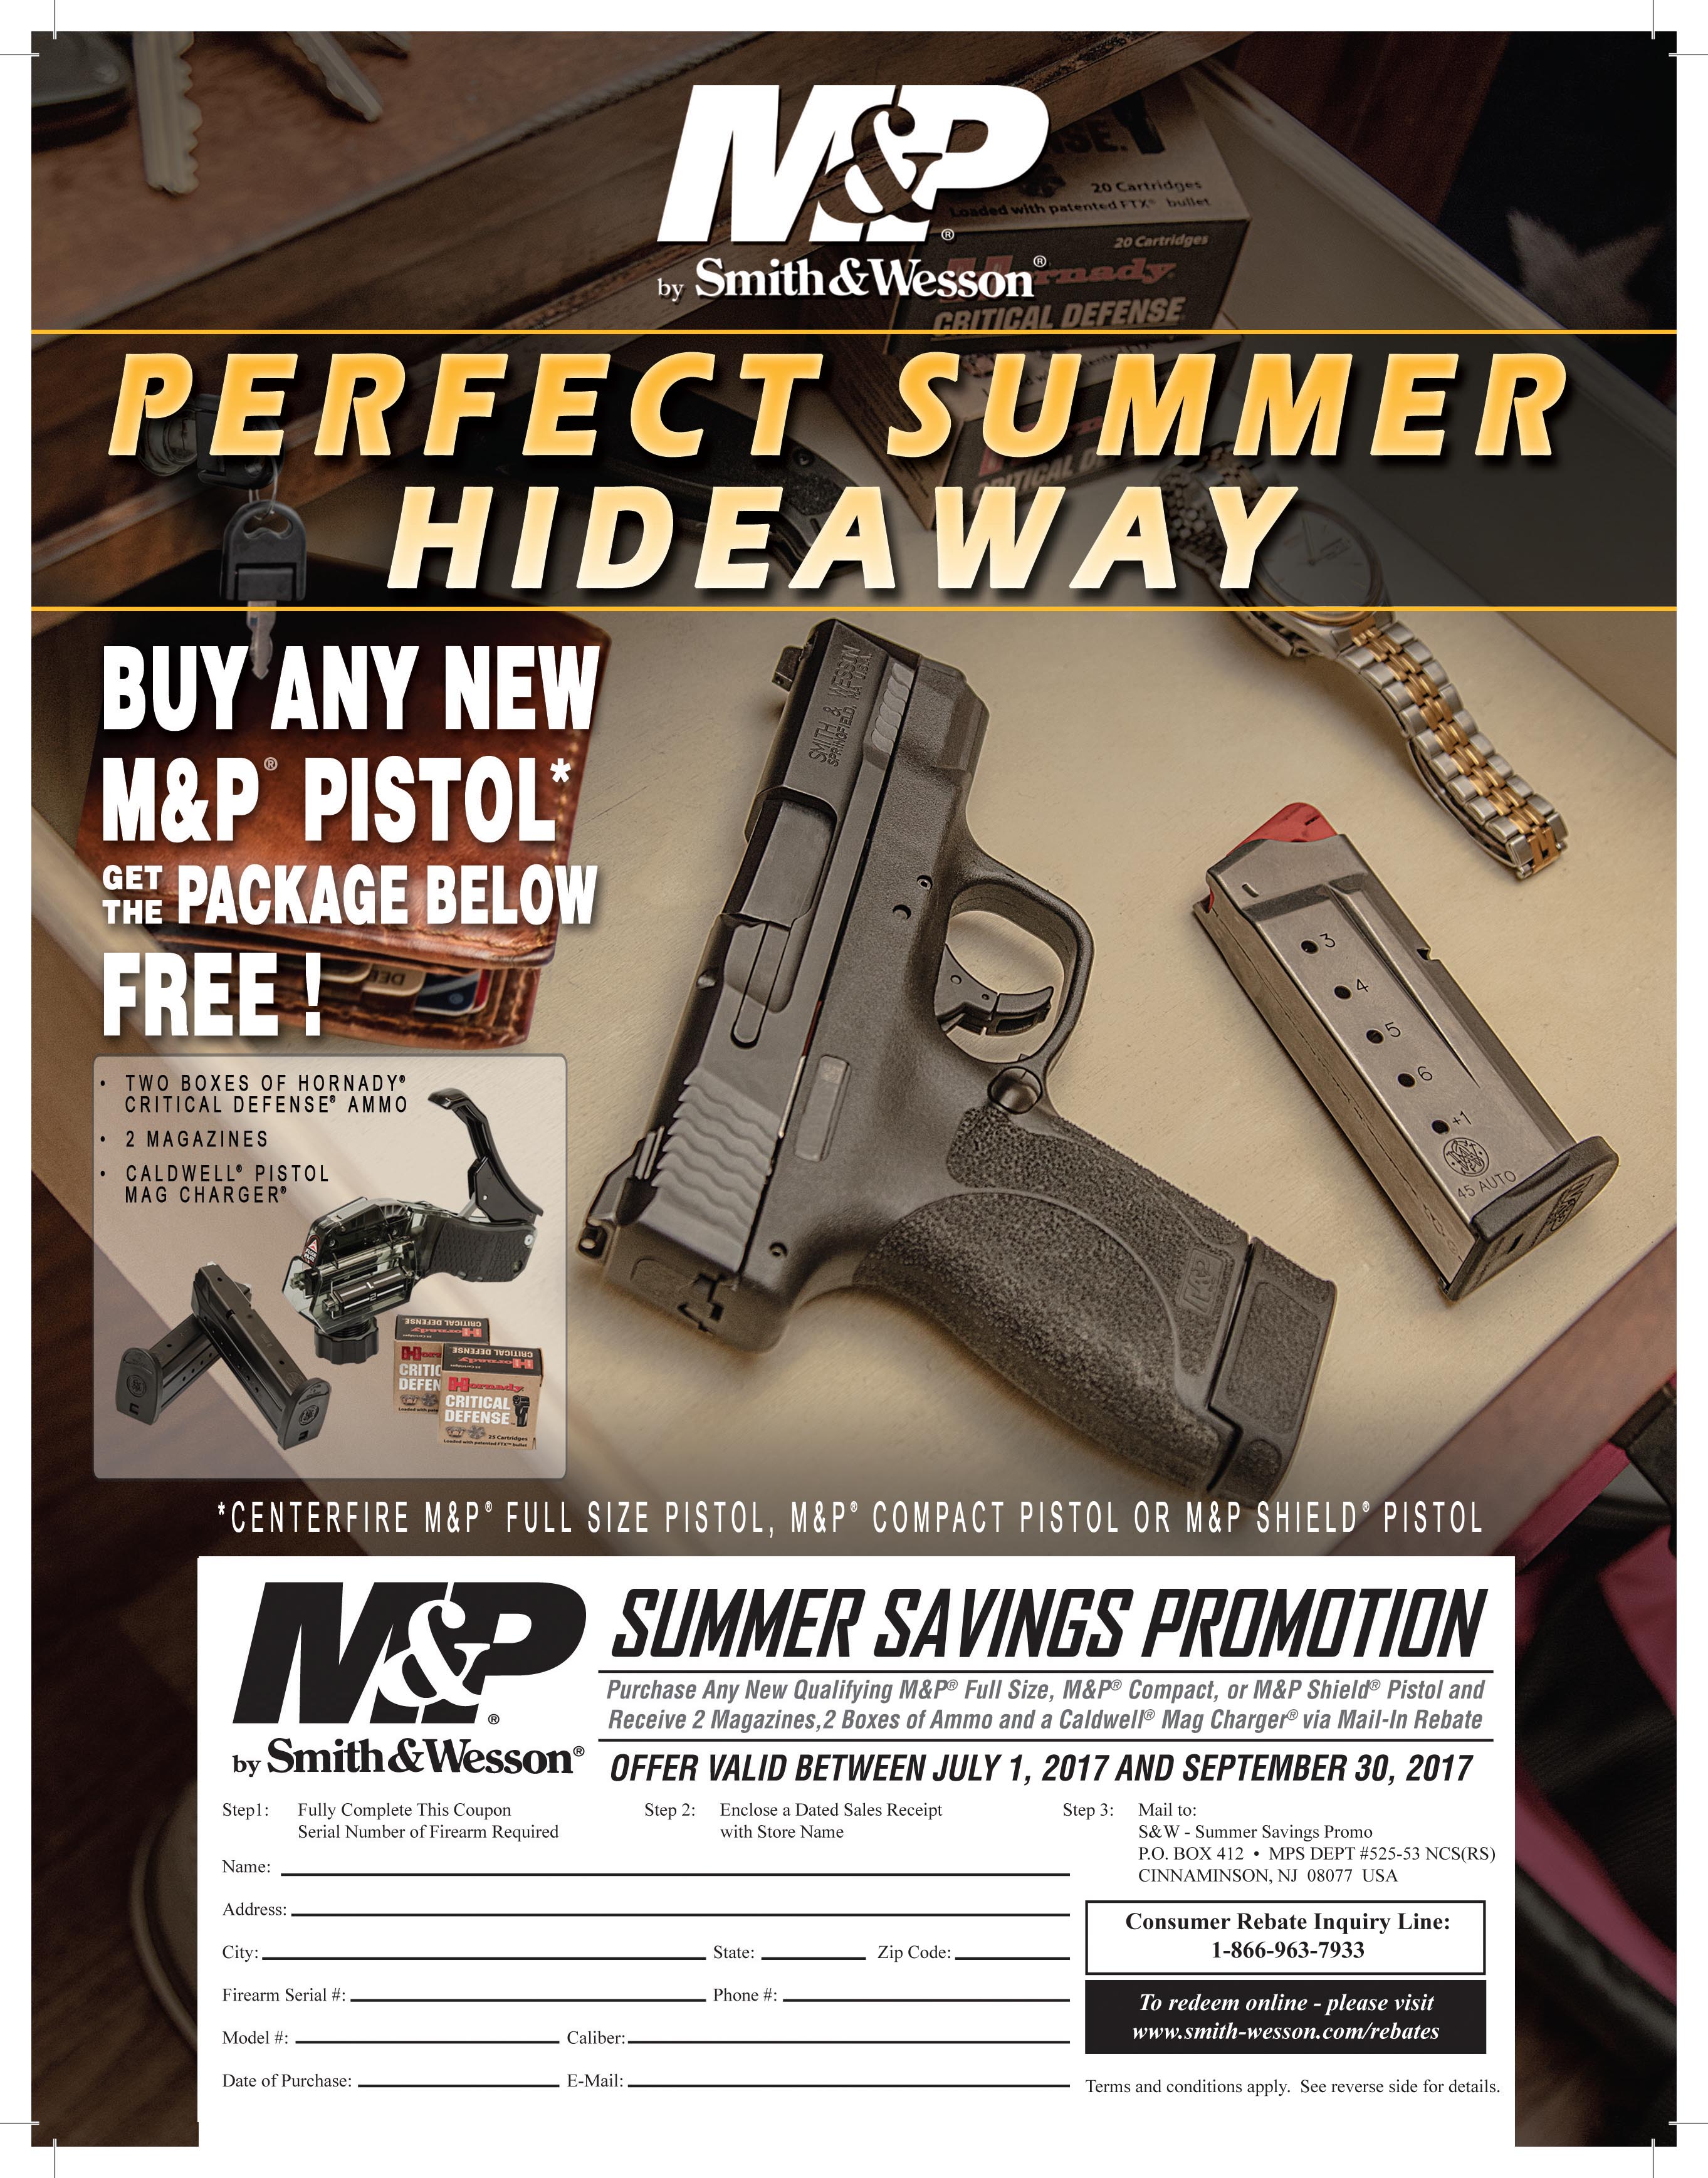 smith-wesson-summer-rebate-simtrainer